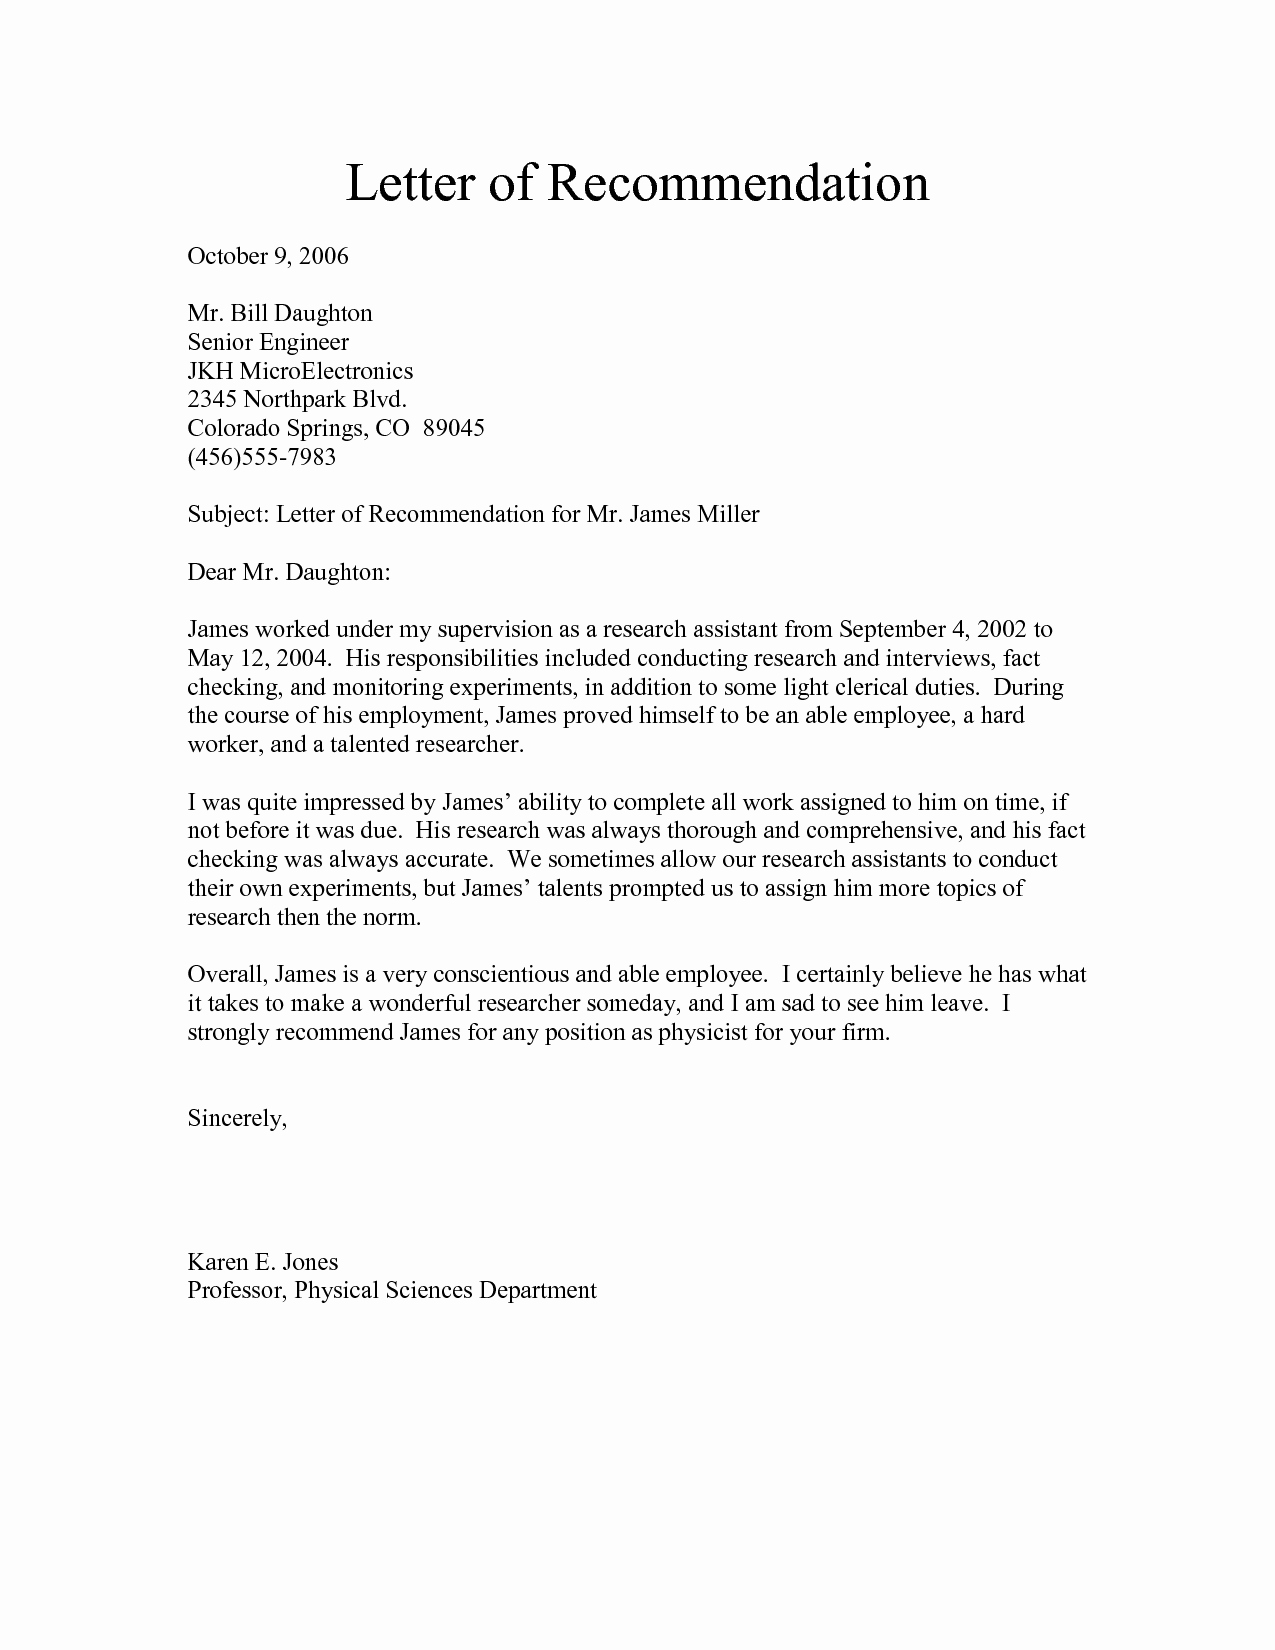 Letter Of Recommendation Letter Template Beautiful Free Re Mendation Letter Download